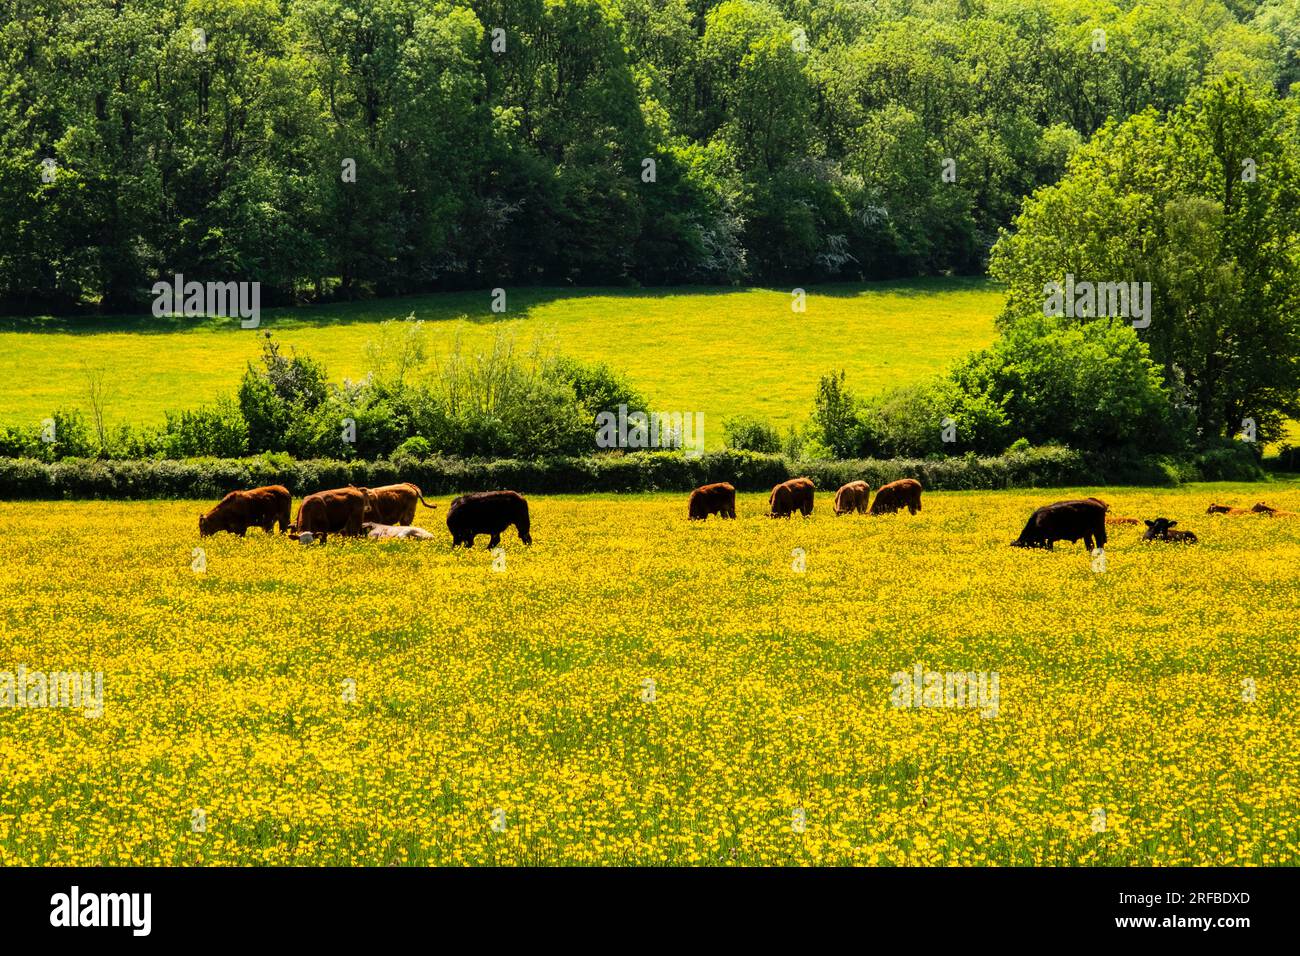 Hereford cattle grazing in a field of yellow Buttercup flowers in the Golden Valley in summer. Peterchurch, Herefordshire, England, UK, Britain Stock Photo